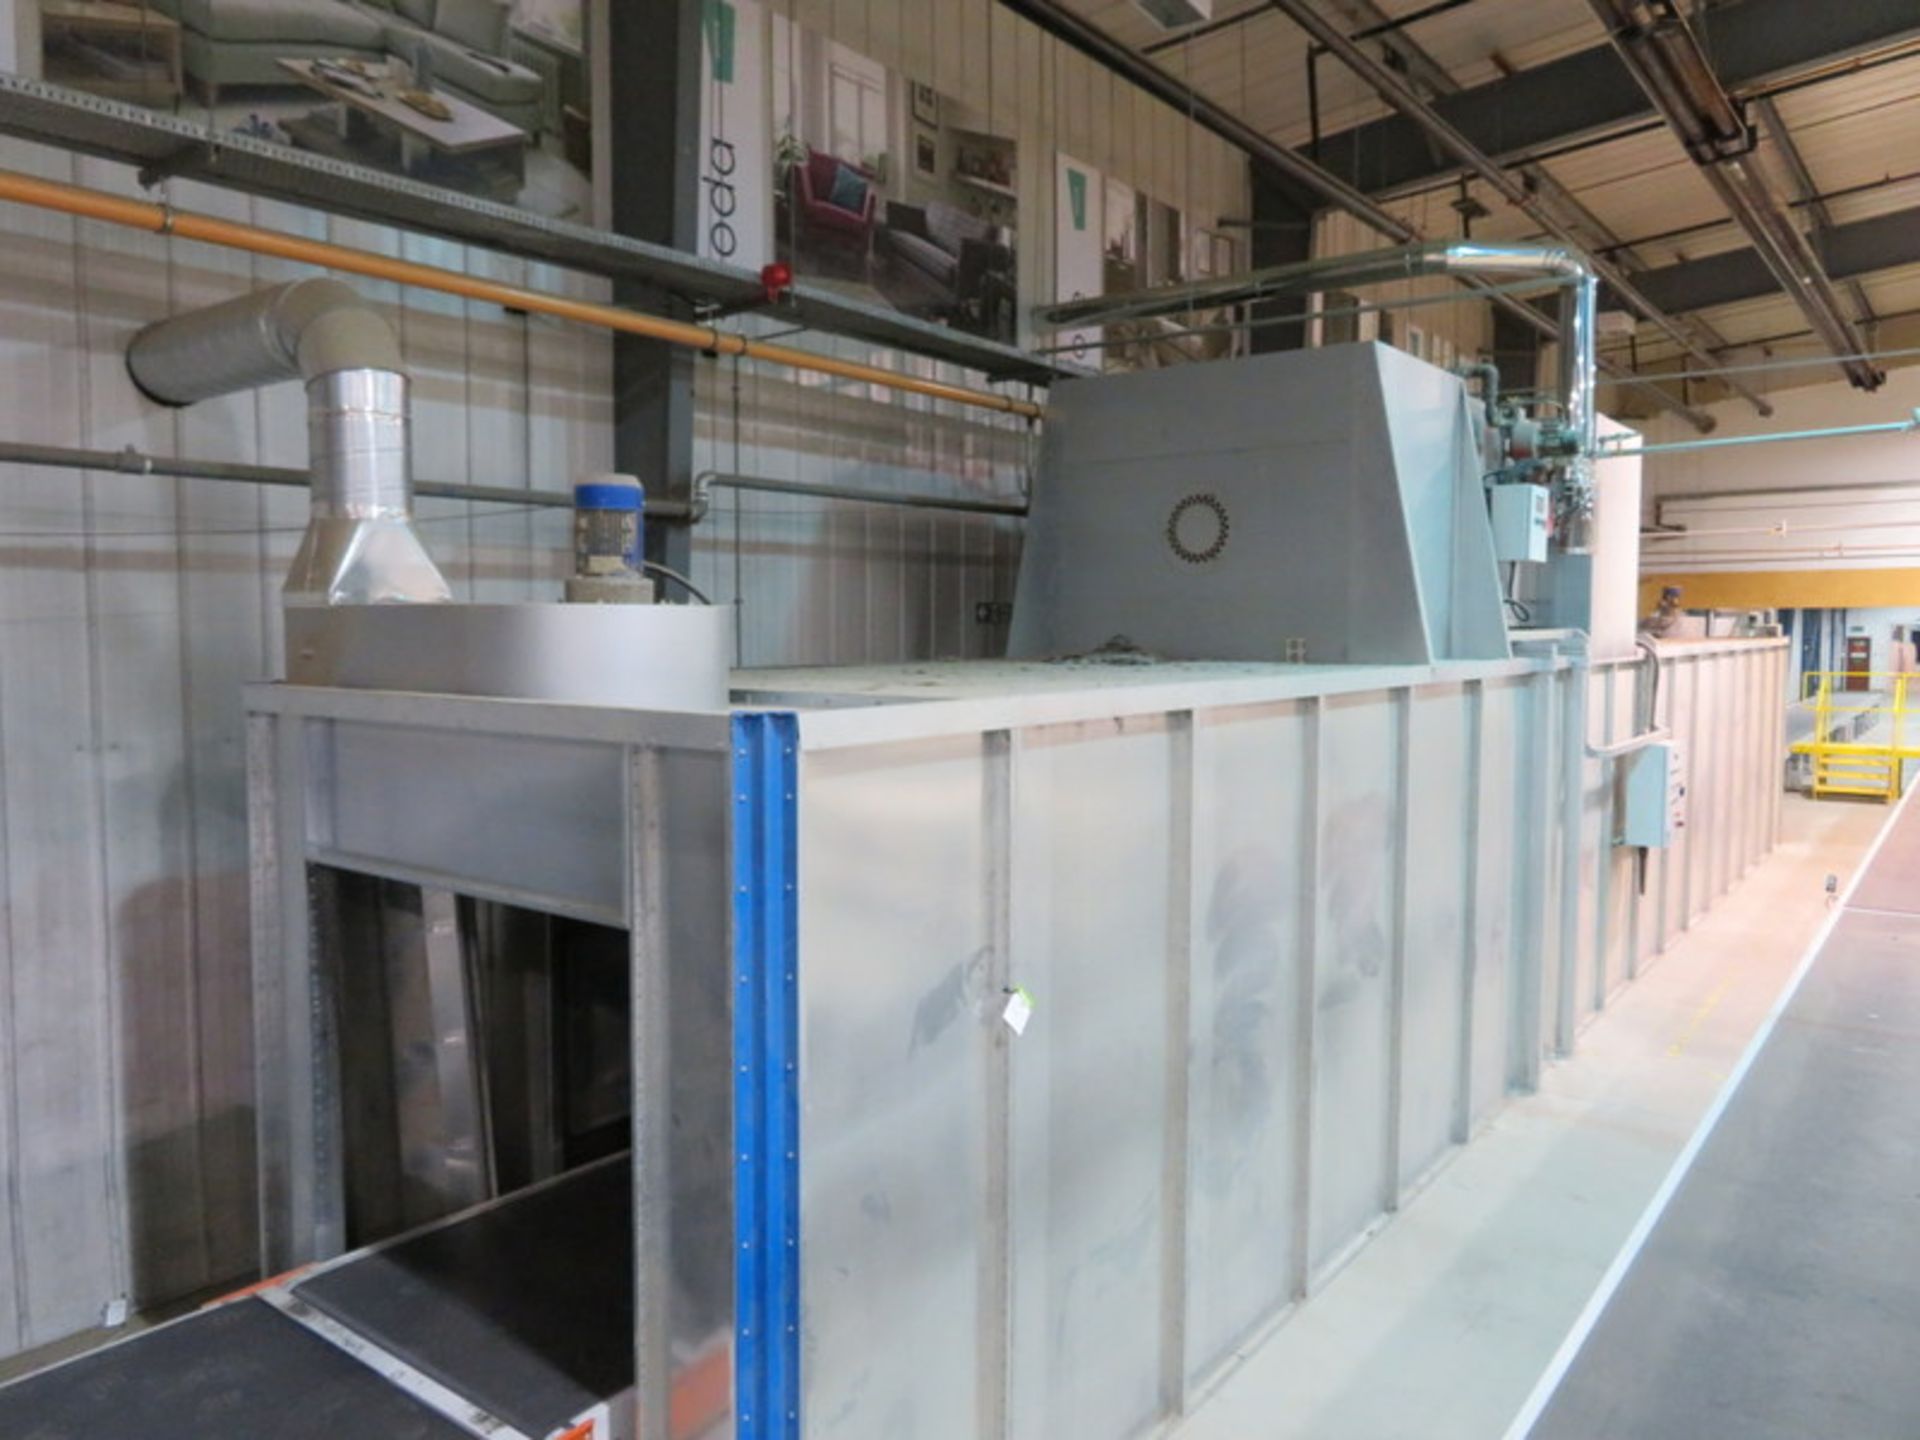 Airflow sectional drying oven. Natural gas. Includes all ducting. Overall dimensions: 2.4m - Image 2 of 11